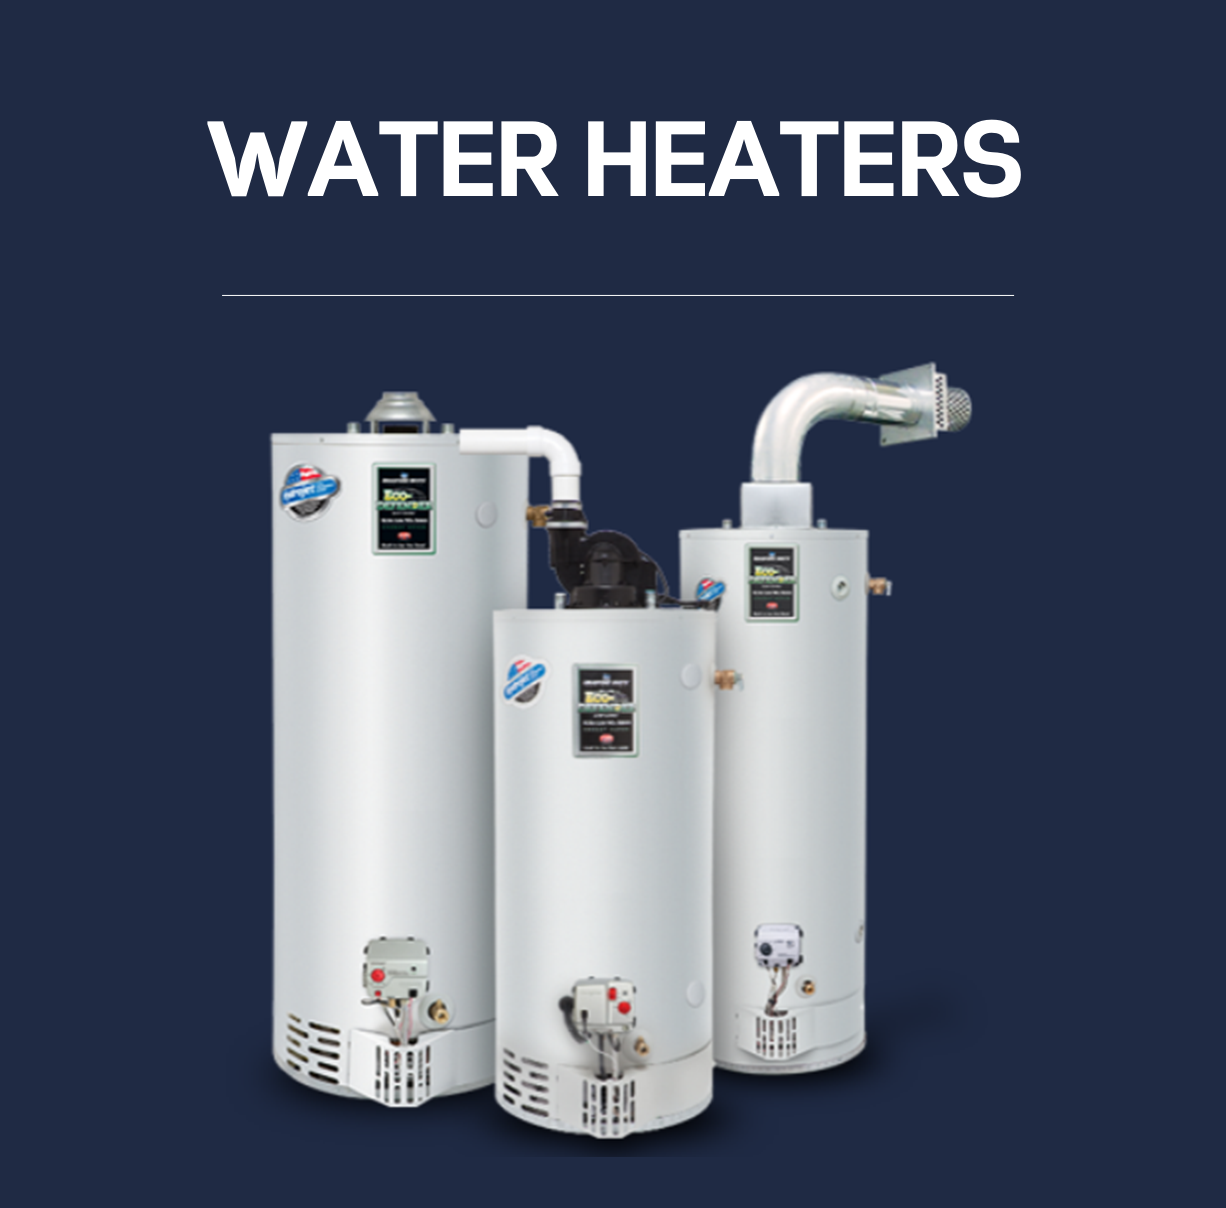 A group of water heaters on display next to each other.